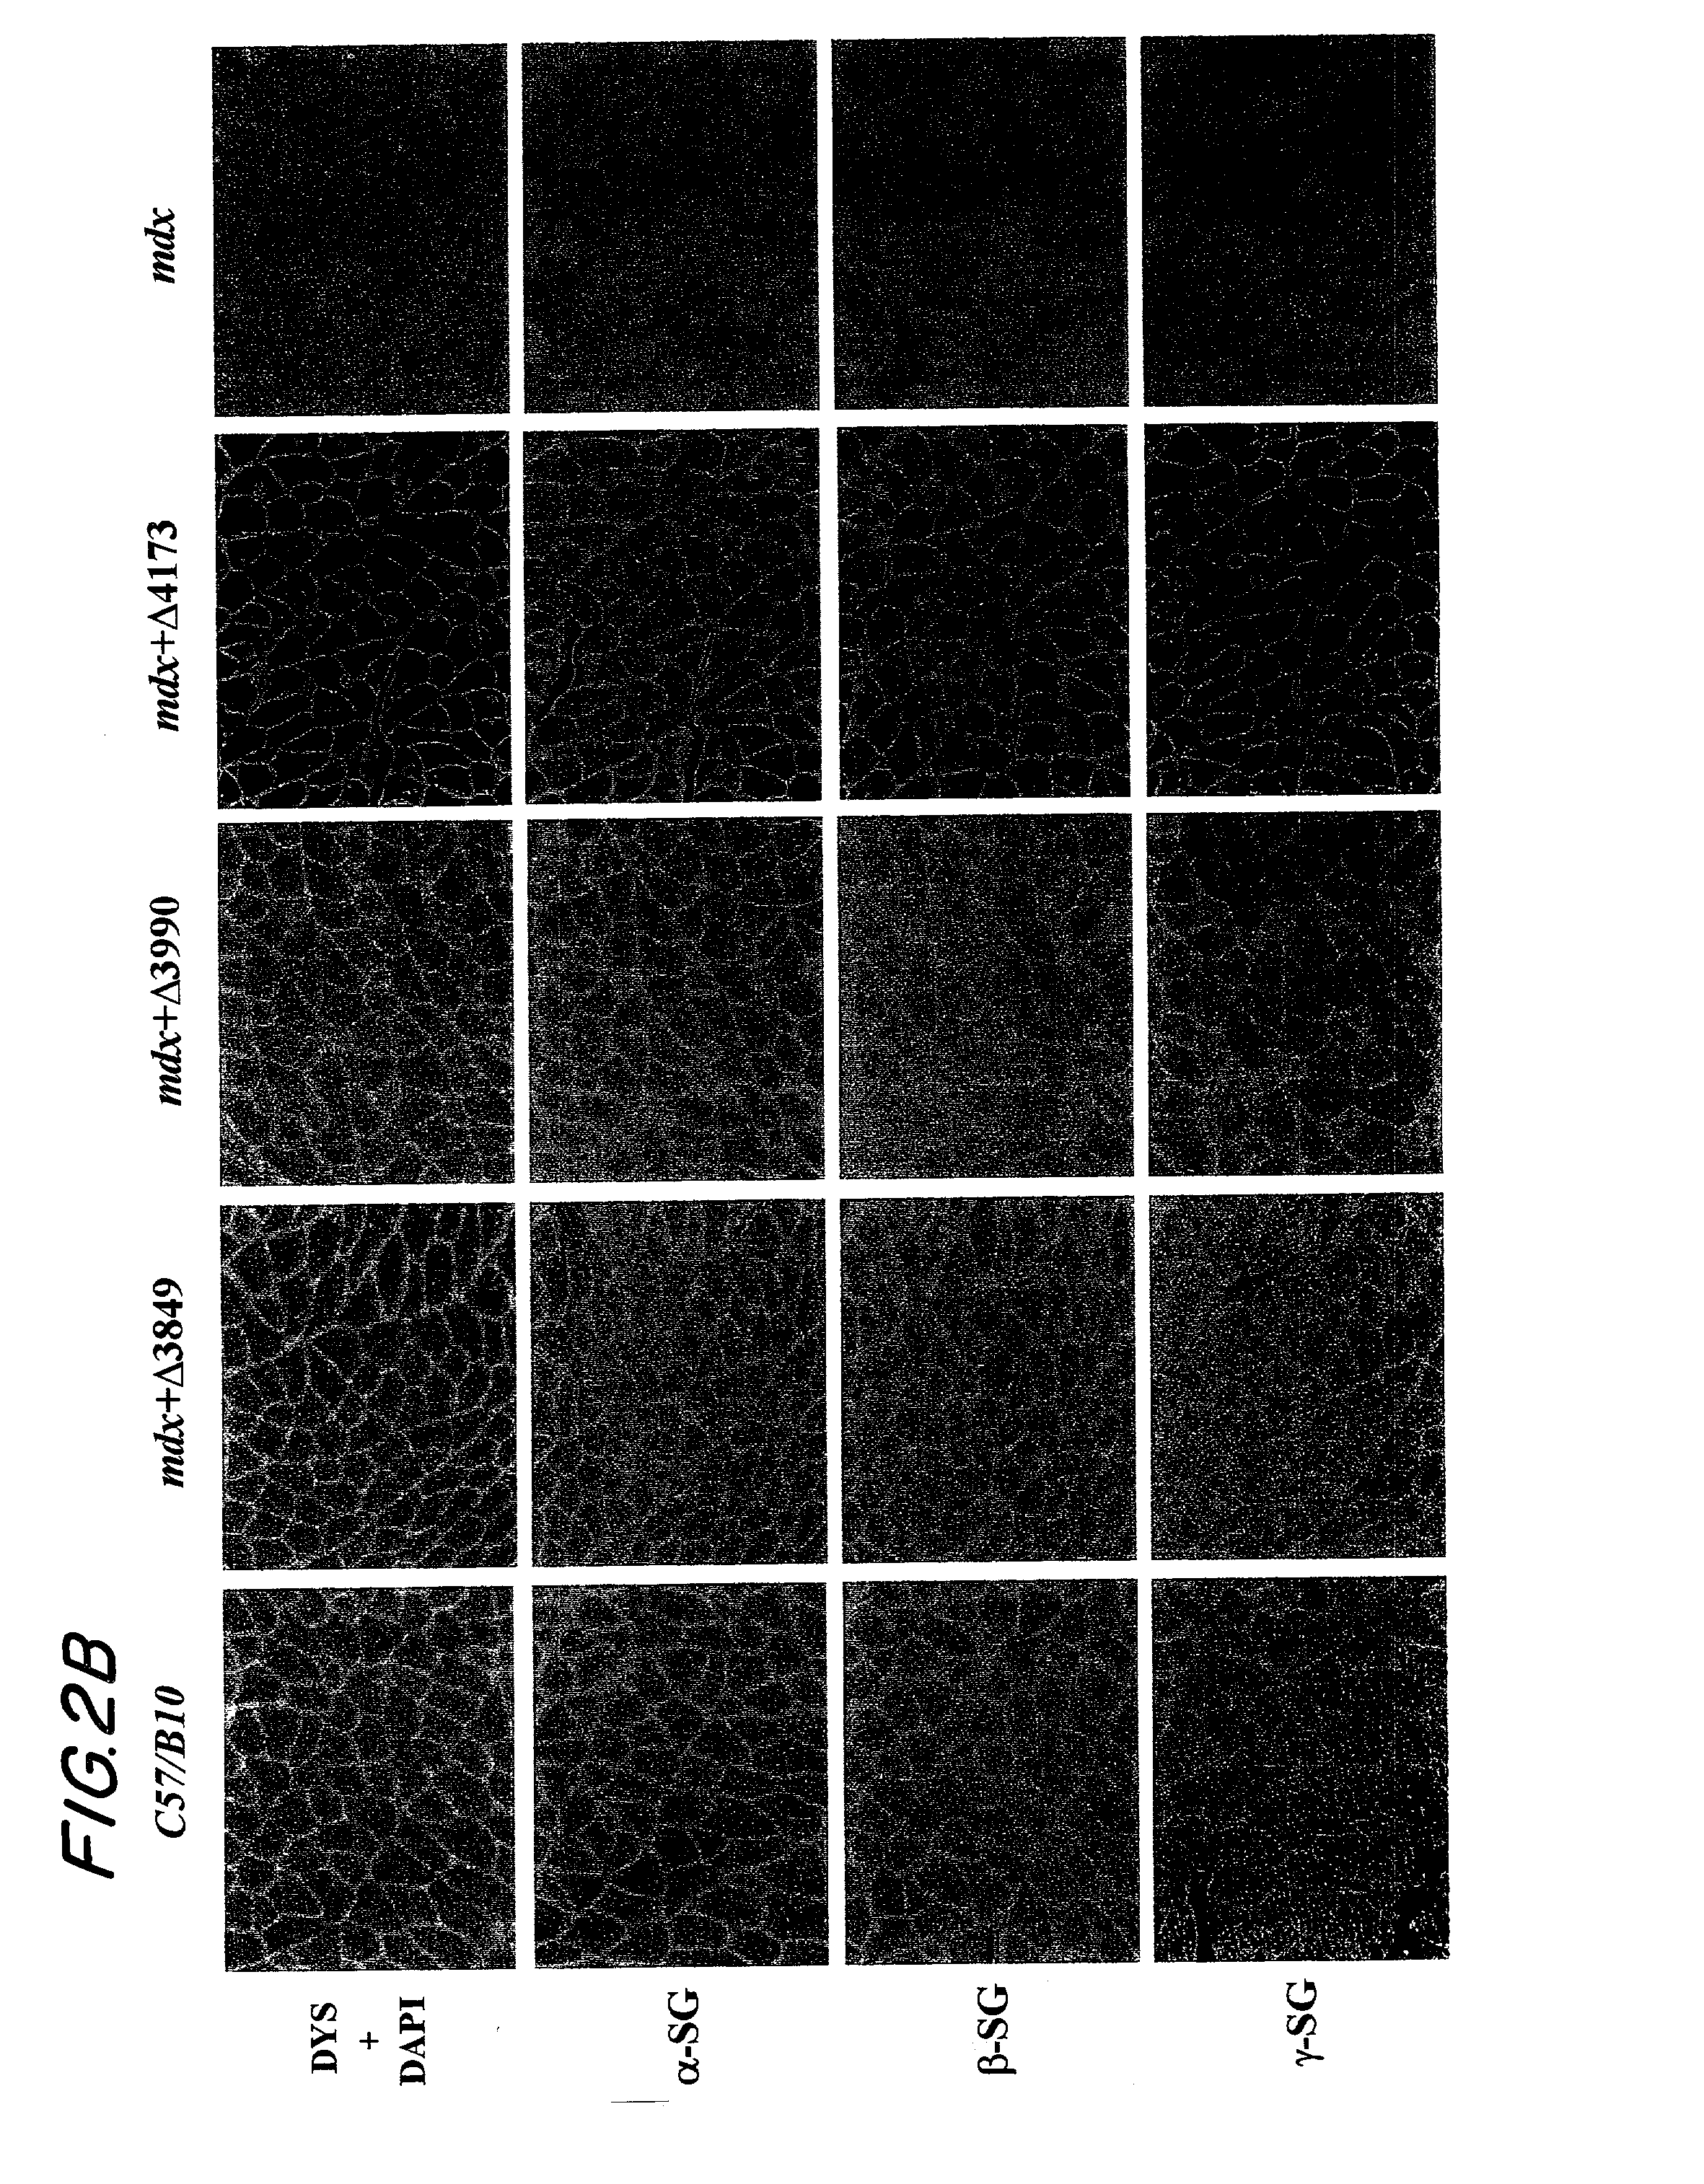 DNA sequences encoding dystrophin minigenes and methods of use thereof